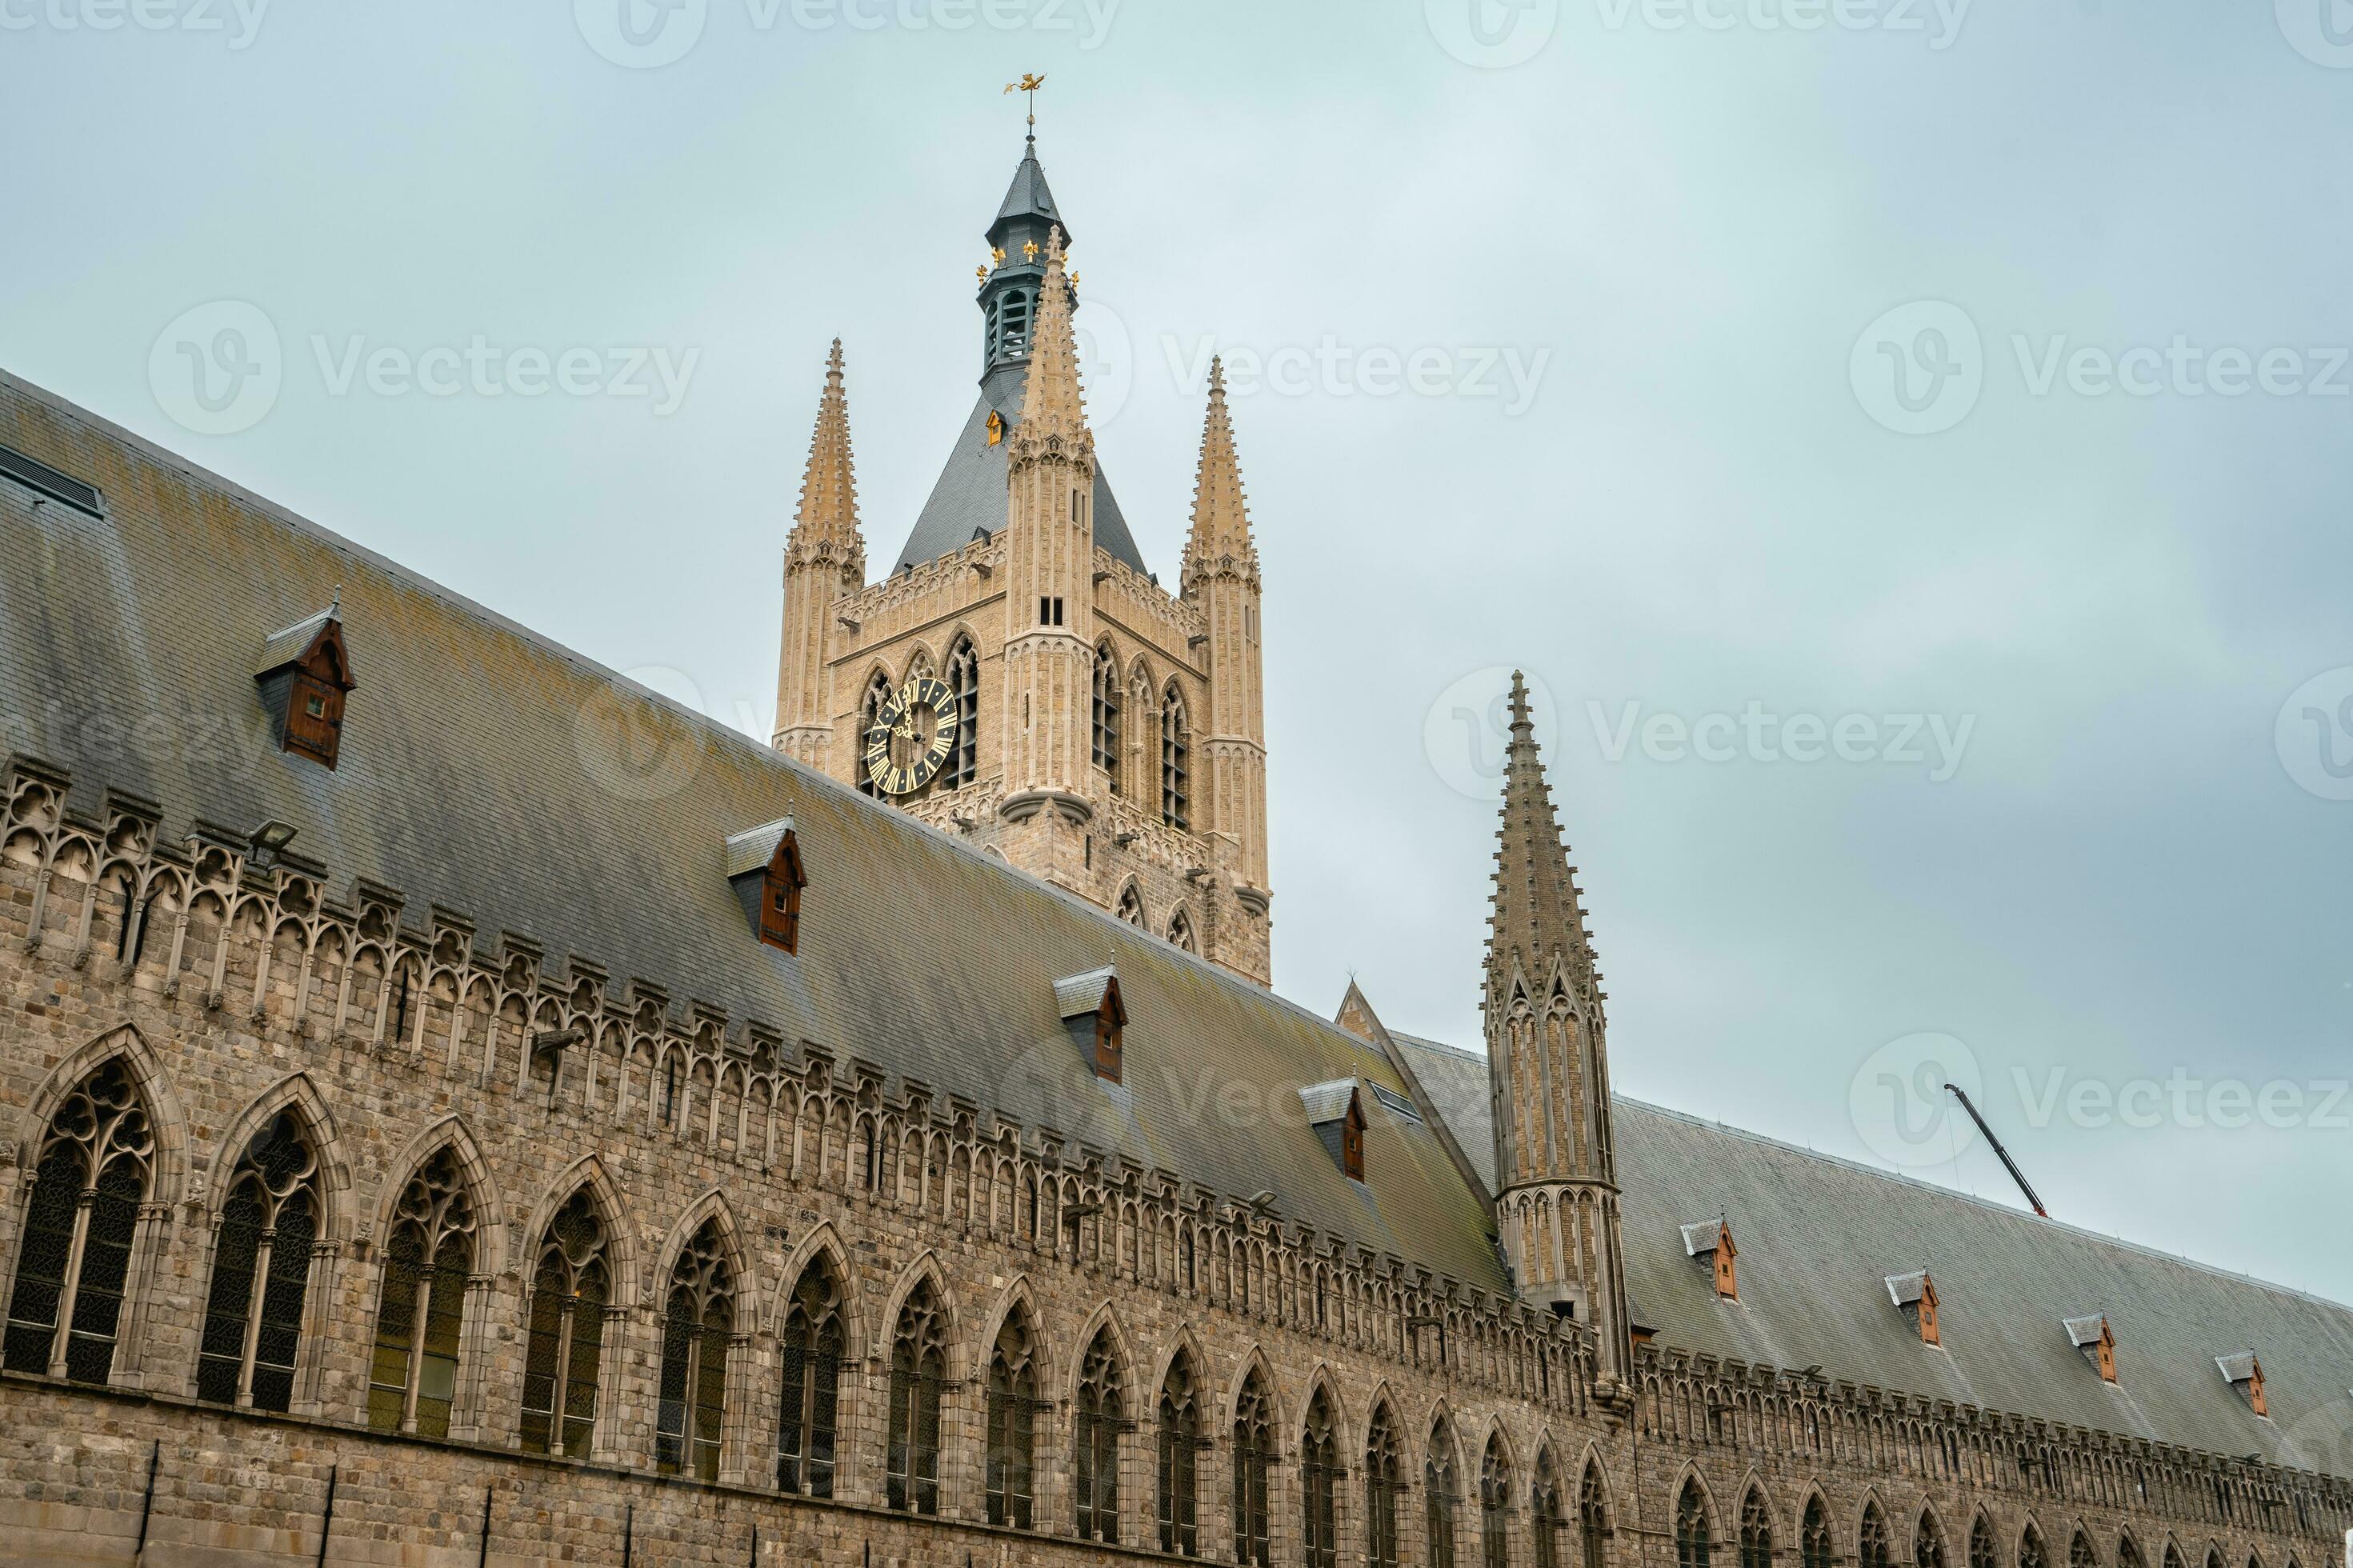 https://static.vecteezy.com/system/resources/previews/027/808/475/large_2x/close-up-from-the-st-maartens-cathedral-in-ypres-belgium-photo.jpg